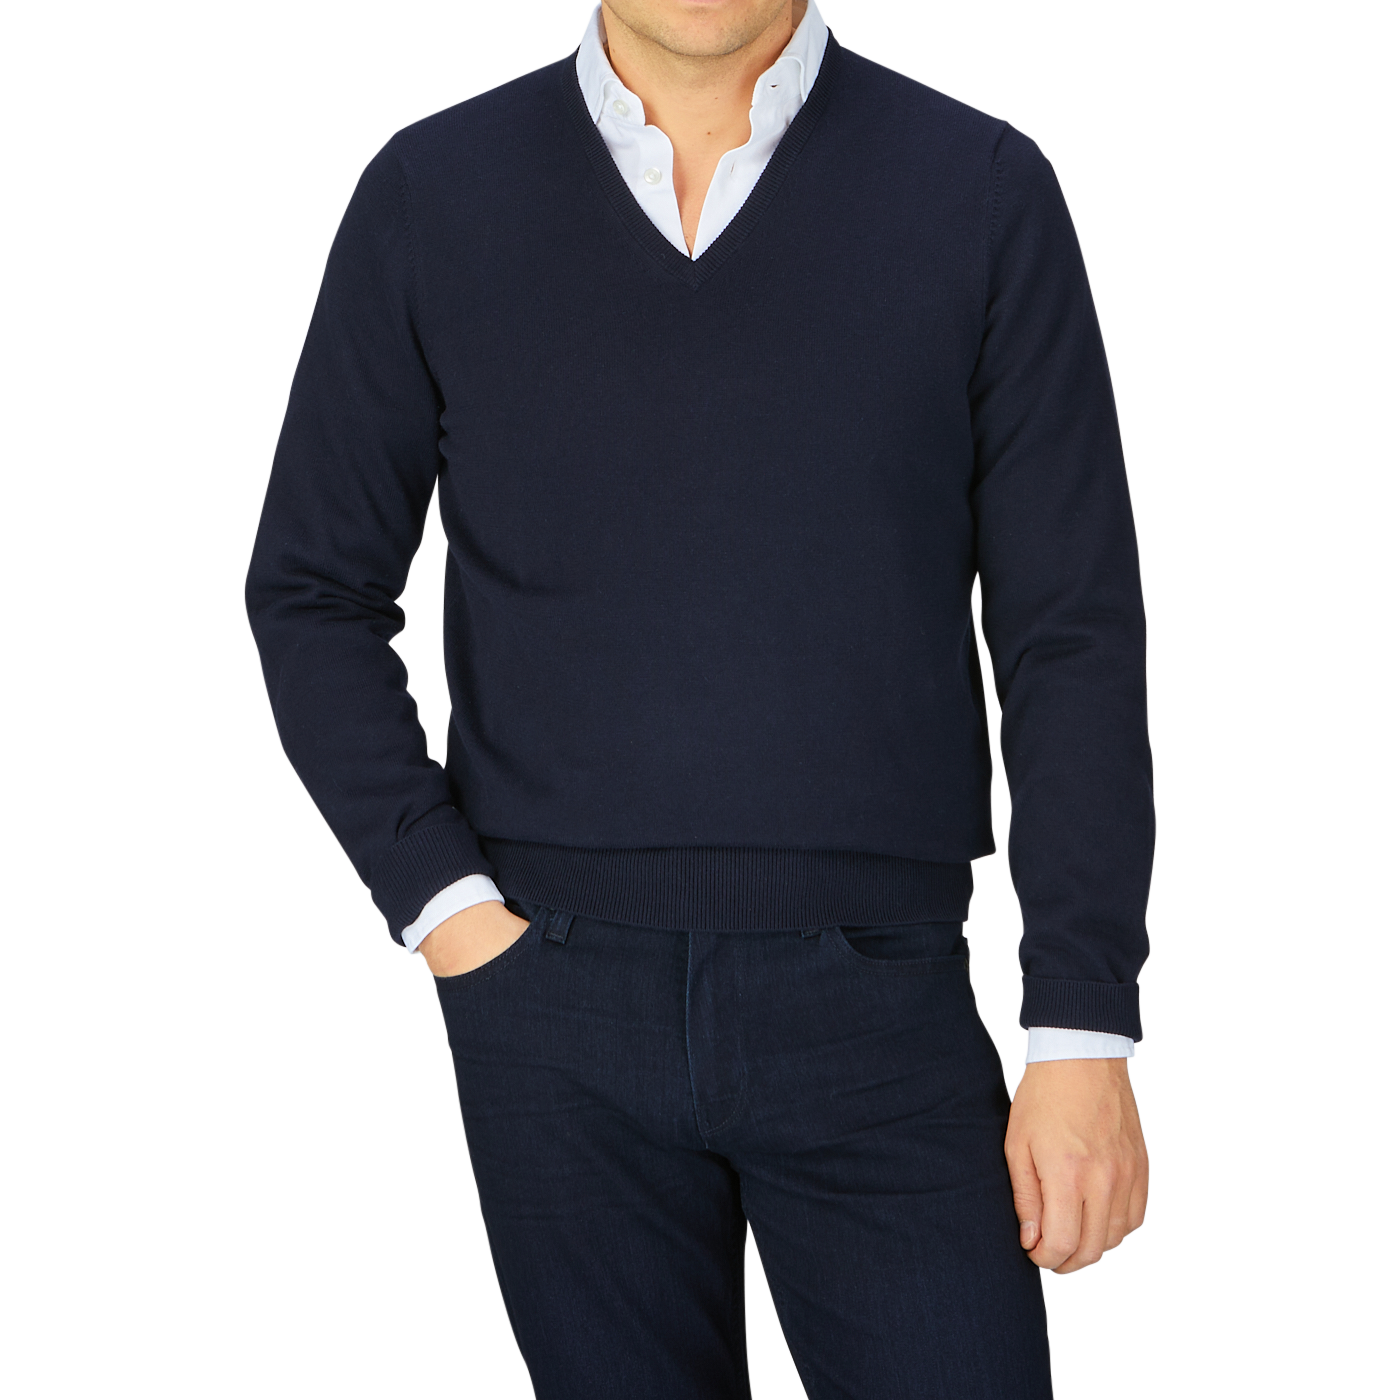 Man wearing a Navy Blue Luxury Cotton V-Neck Sweater by Alan Paine over a white shirt with dark trousers against a grey background.